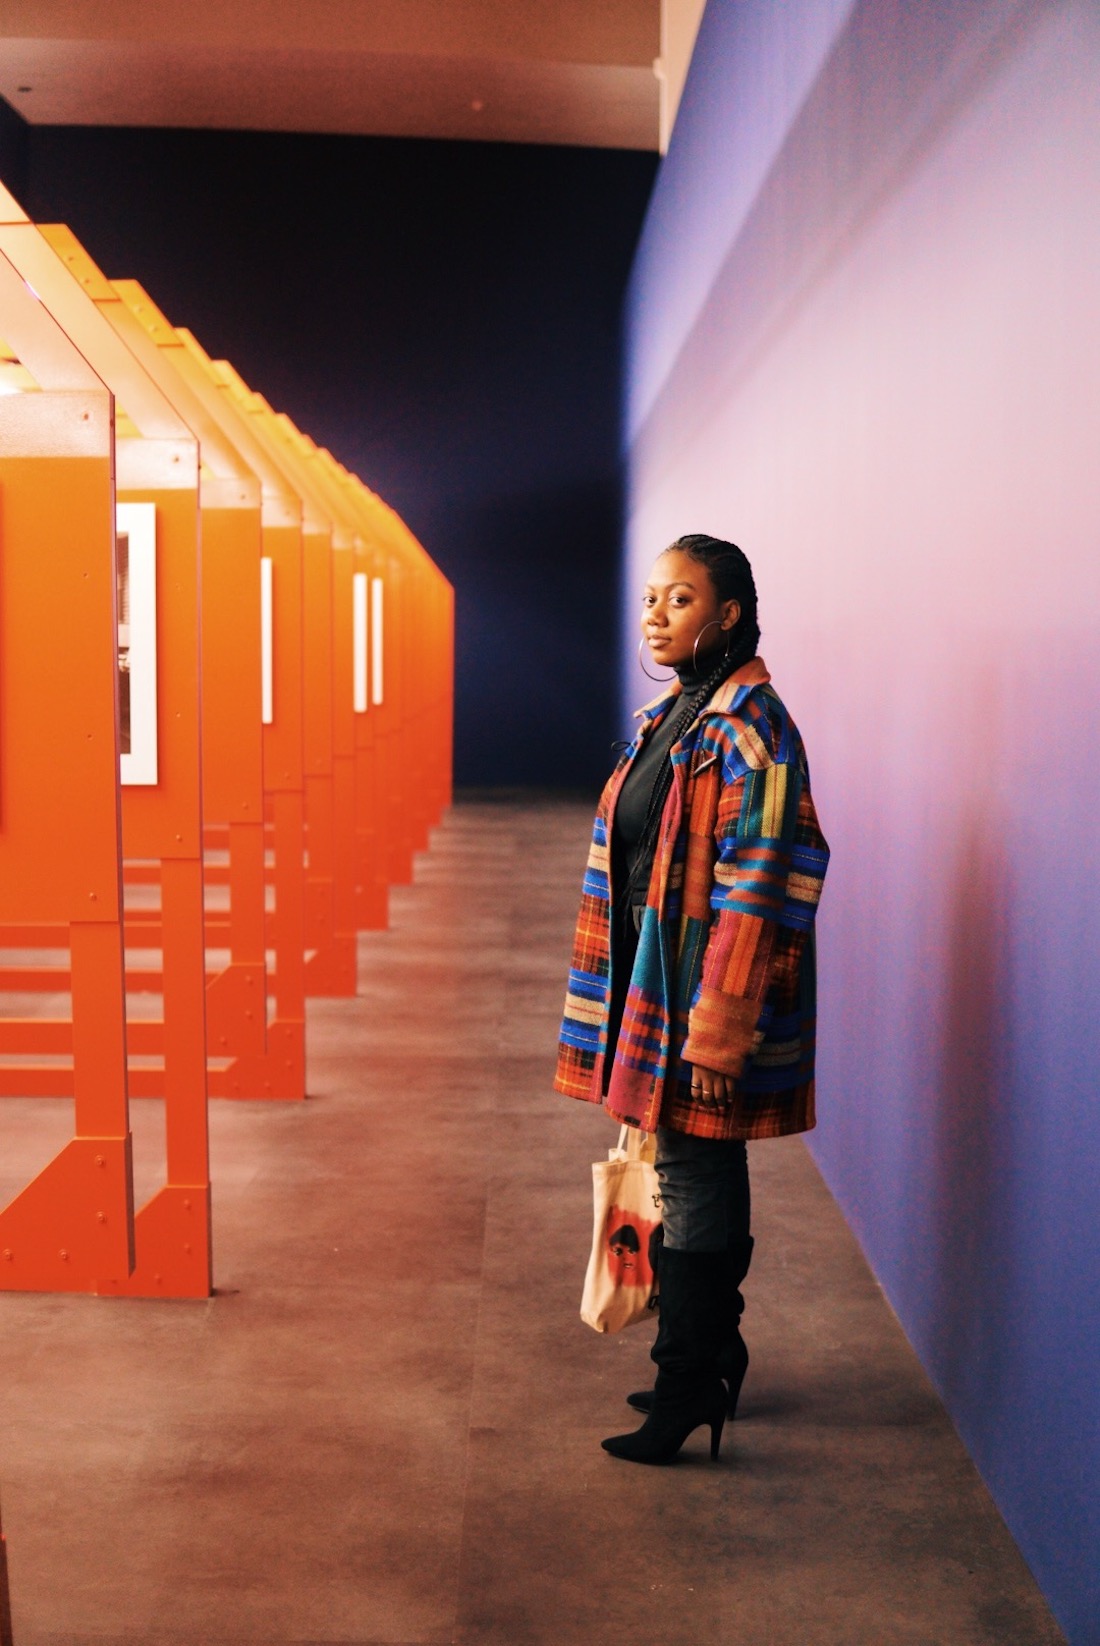 Wexner Center intern Dejiah Archie-Davis, a young woman of color wearing a bright plaid coat, standing in the installation of LaToya Ruby Frazier's The Last Cruze at the Wexner Center for the Arts. Archie-Davis is an intern at the center for Spring 2020.